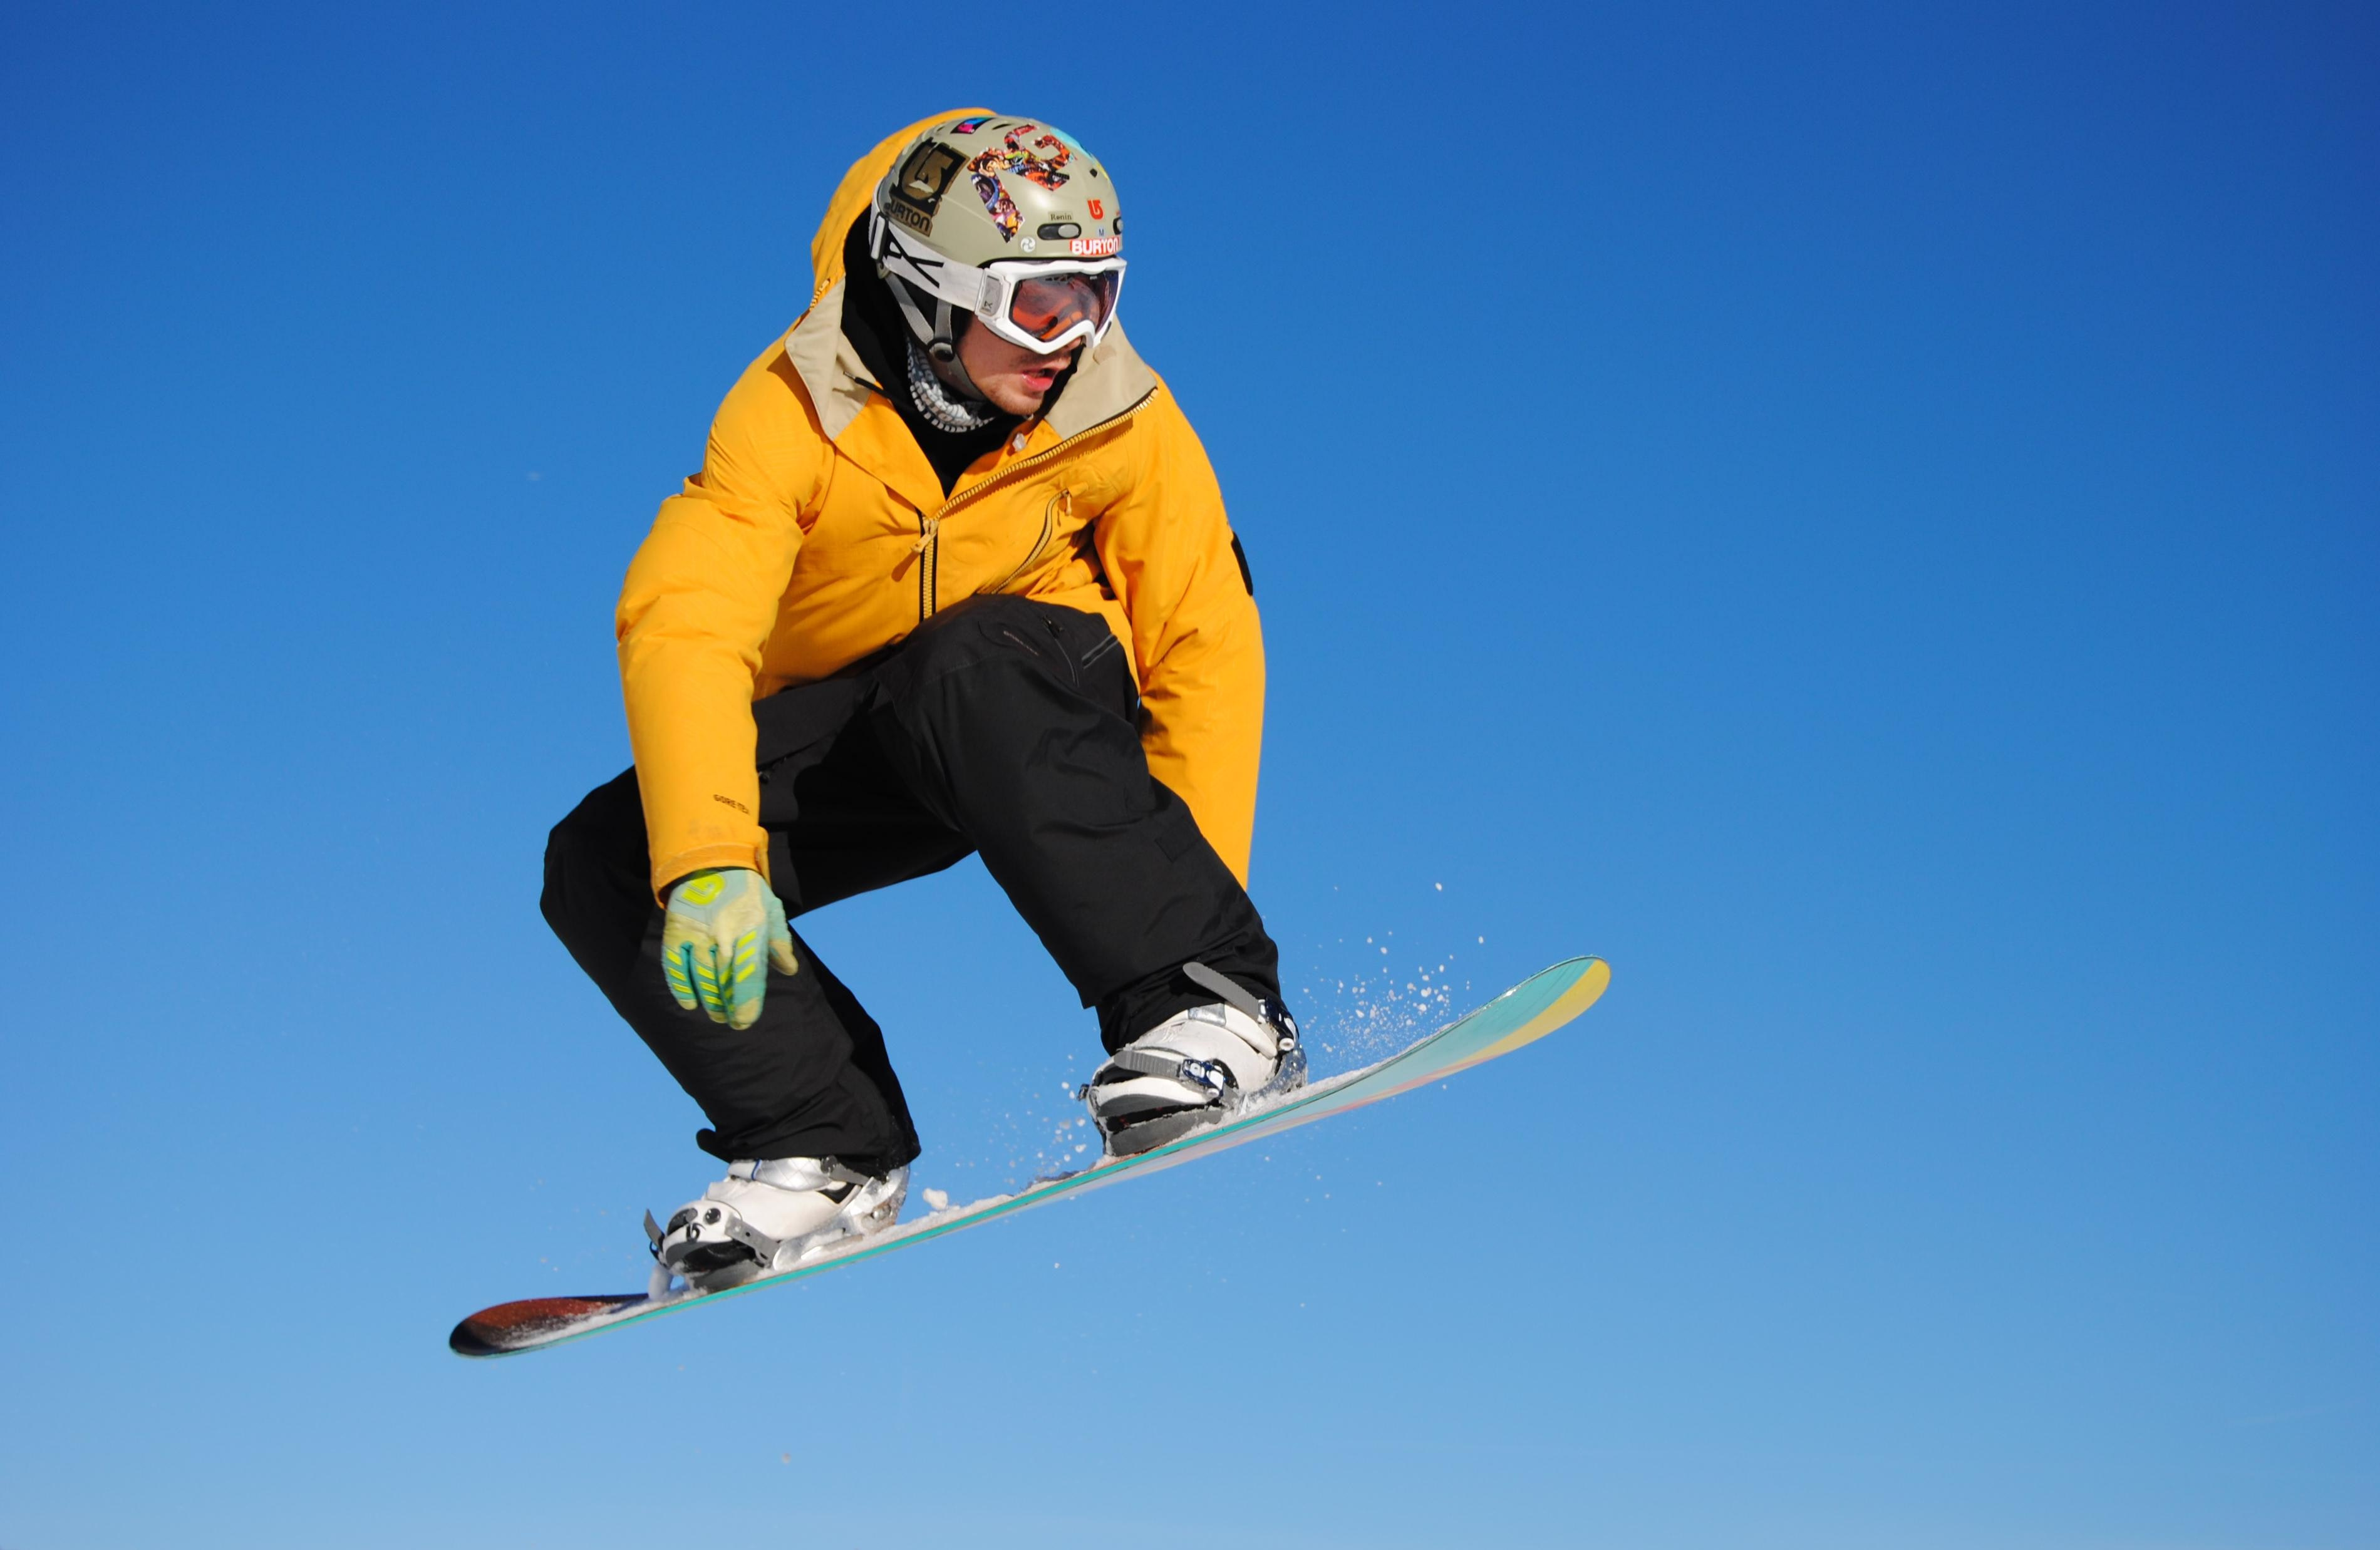 Skateboard and Snow Sports Board Shop for Sale in Denver